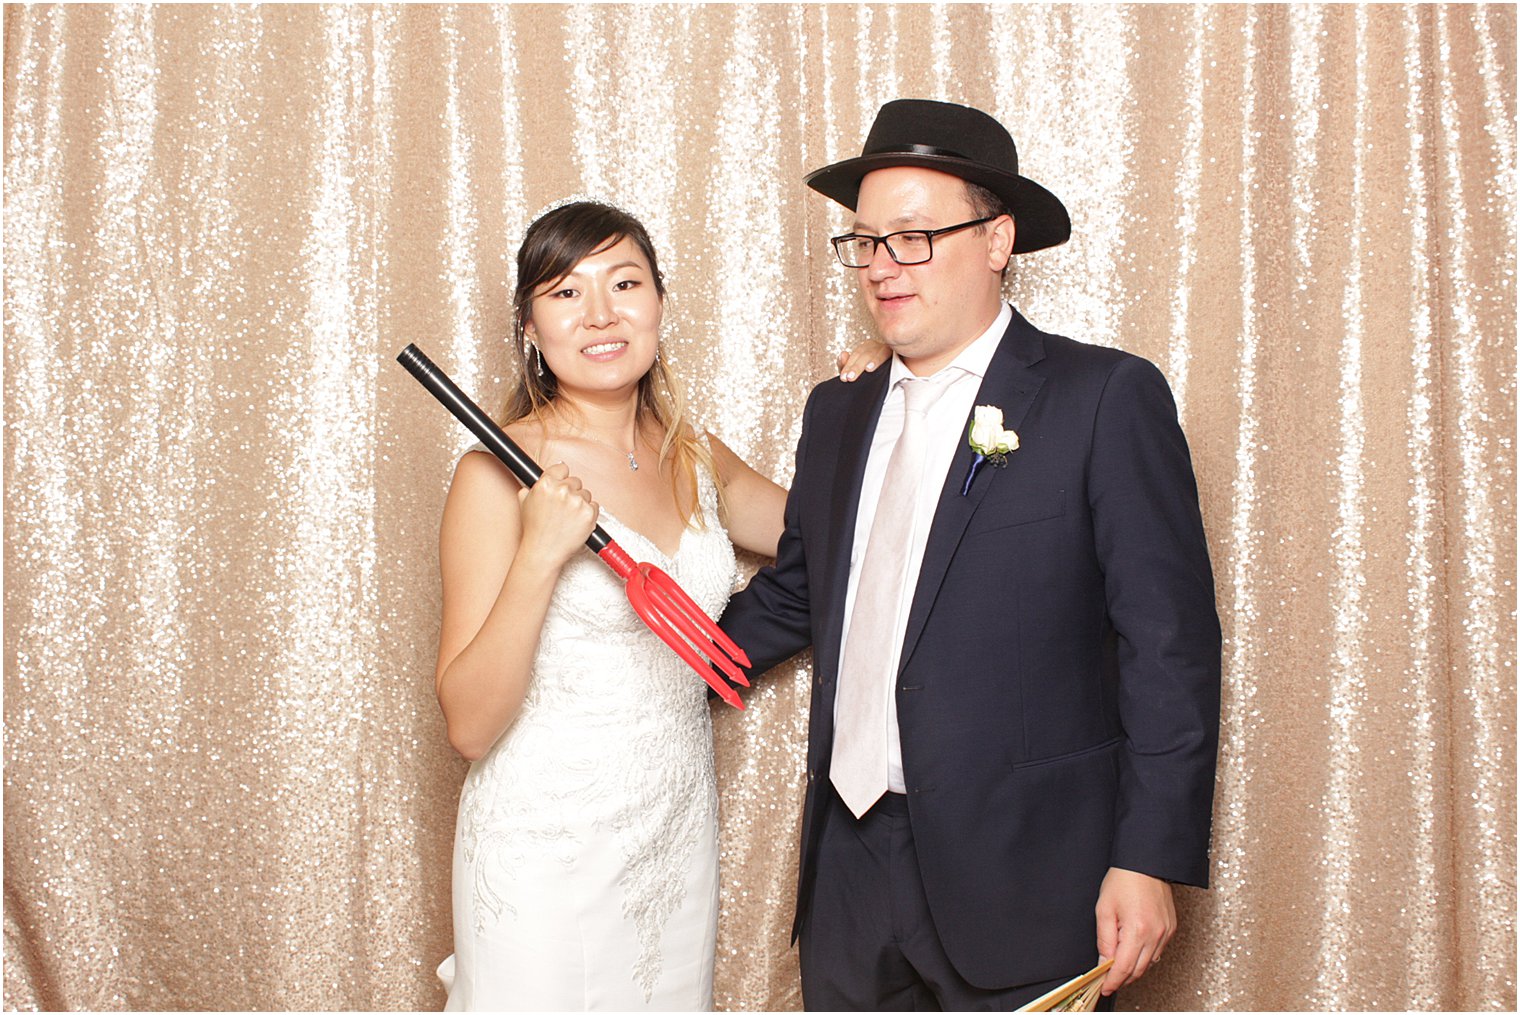 Lake Mohawk Country Club wedding reception Photo Booth